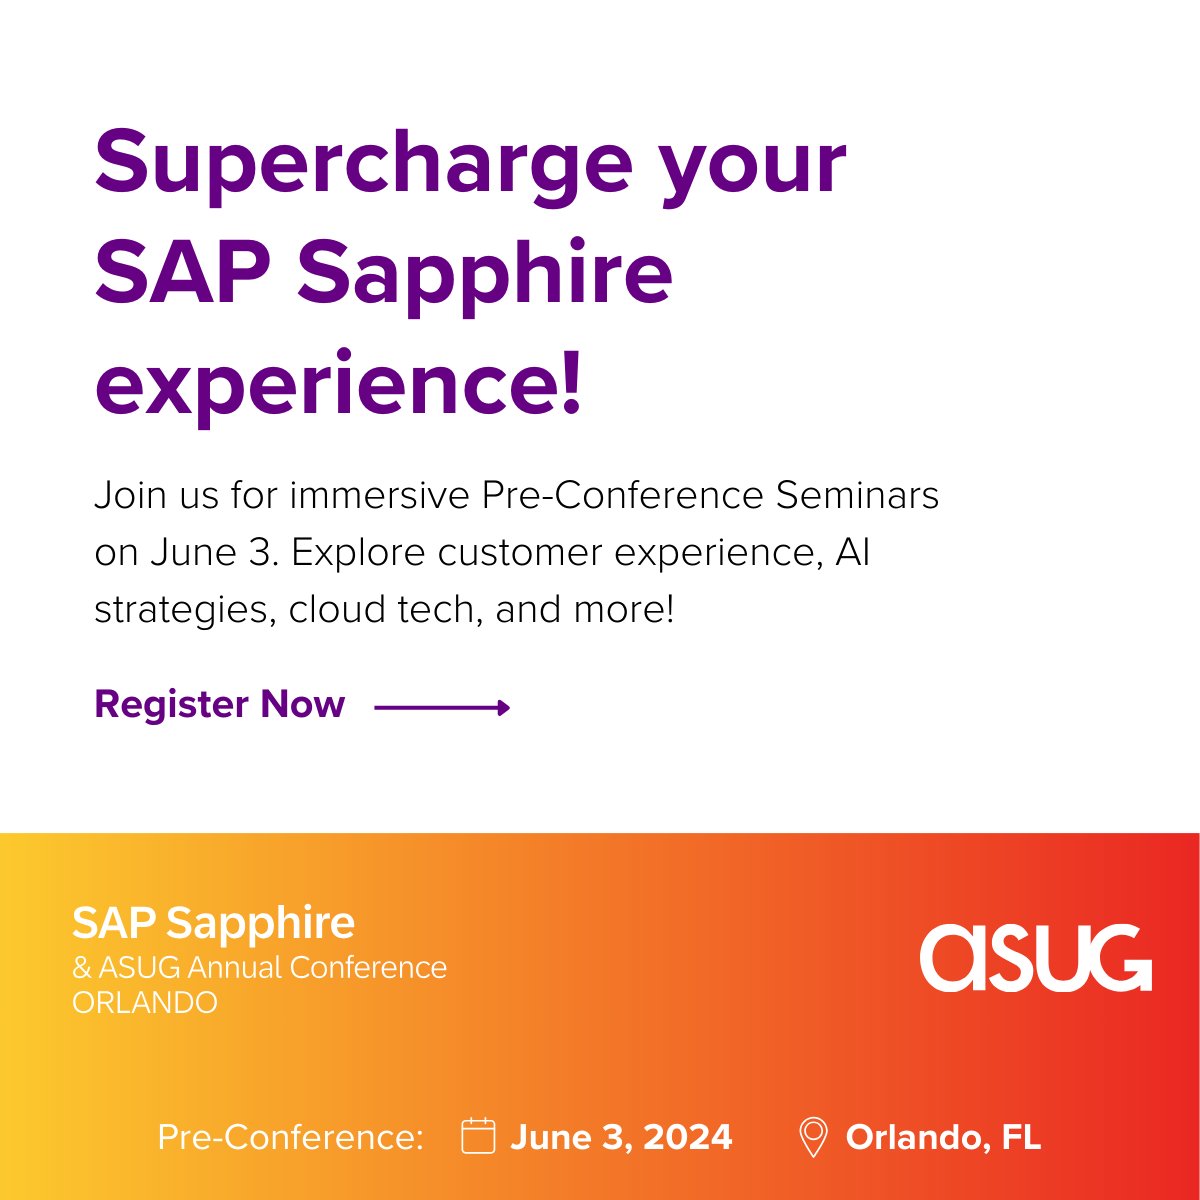 Will you be at #SAPSapphire & #ASUGAnnualConference? Make sure to sign up for our SAP BTP pre-conference seminar! Hear real-world examples of data integrations, low-code/no-code customizations and #AI use cases. Reserve a spot now: bit.ly/3wviLnT